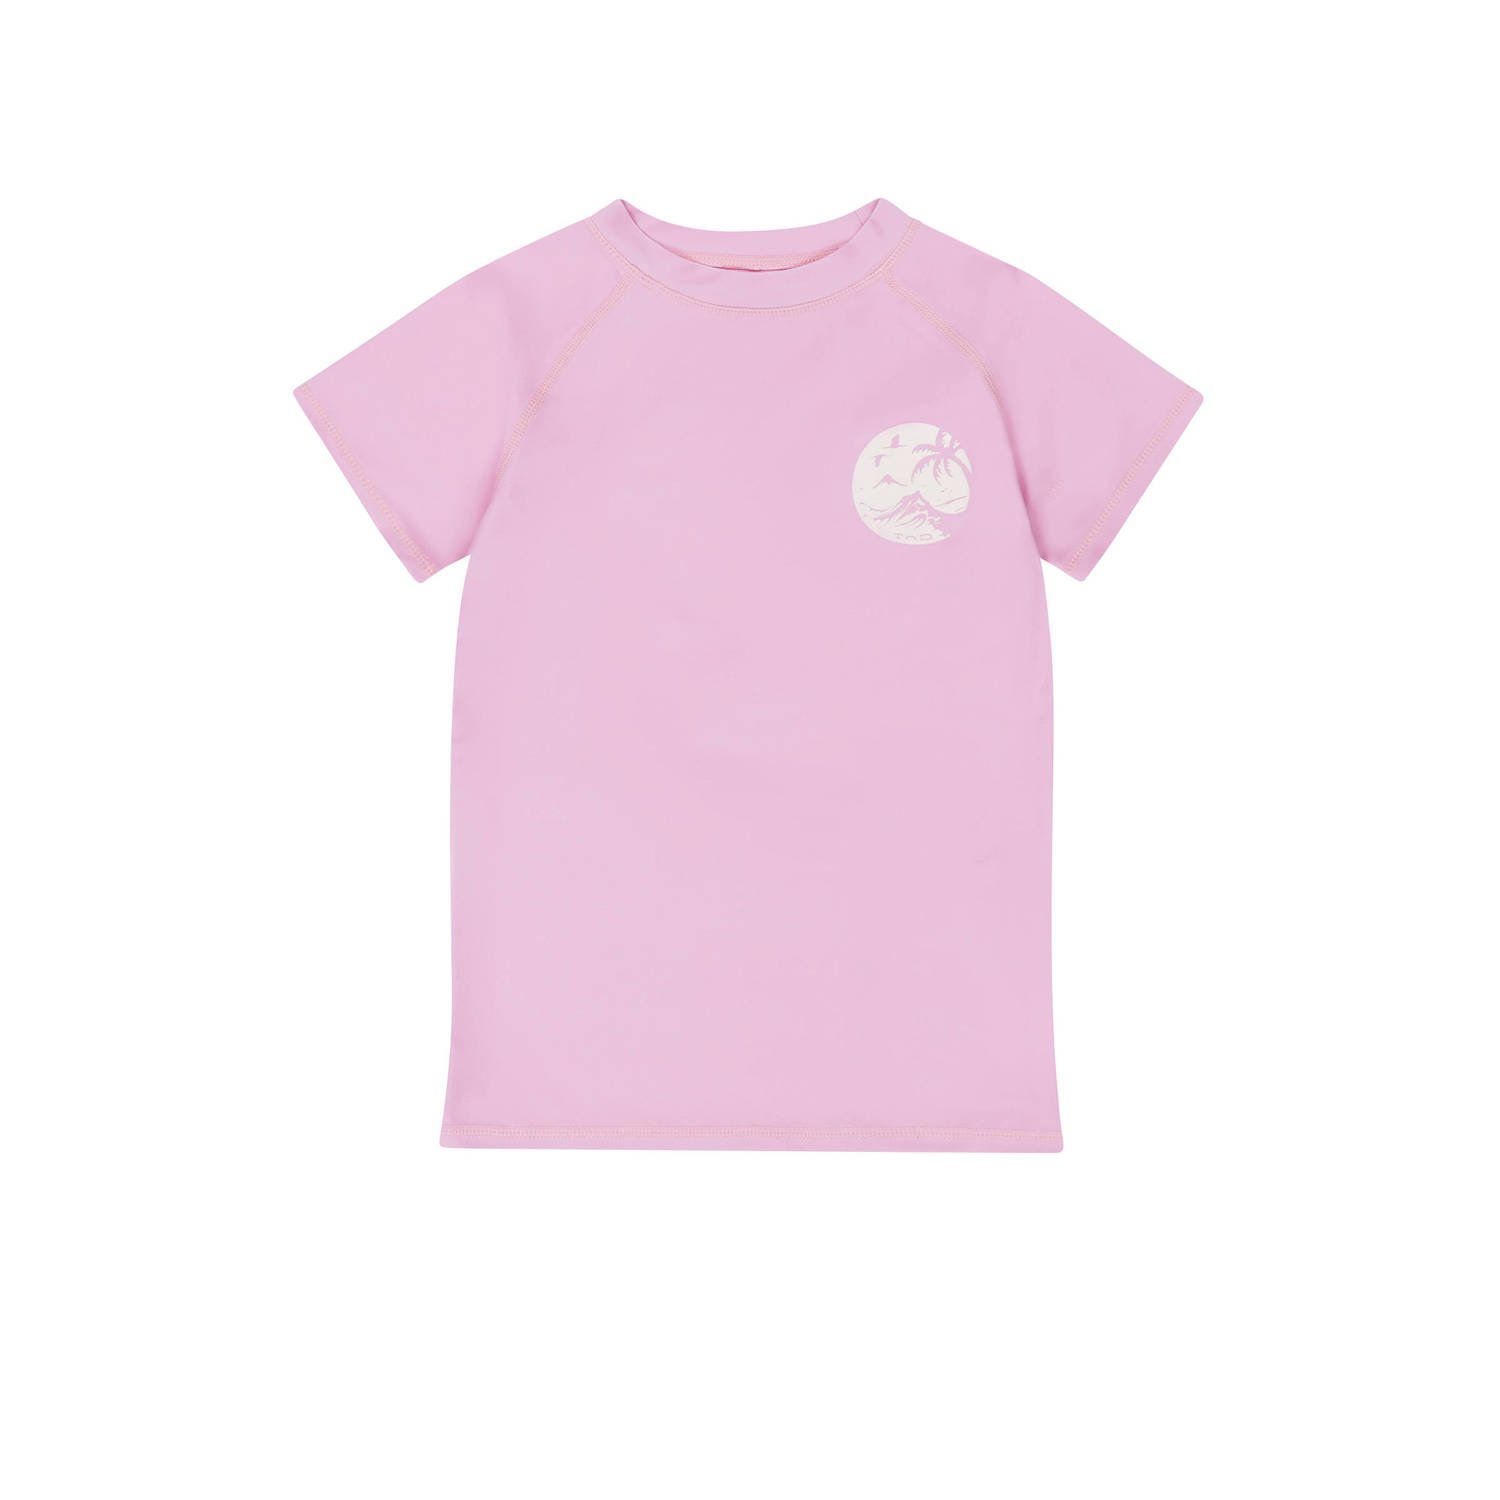 Tumble 'n Dry UV T-shirt Soleil roze UV shirt Meisjes Gerecycled polyester Ronde hals 134 140